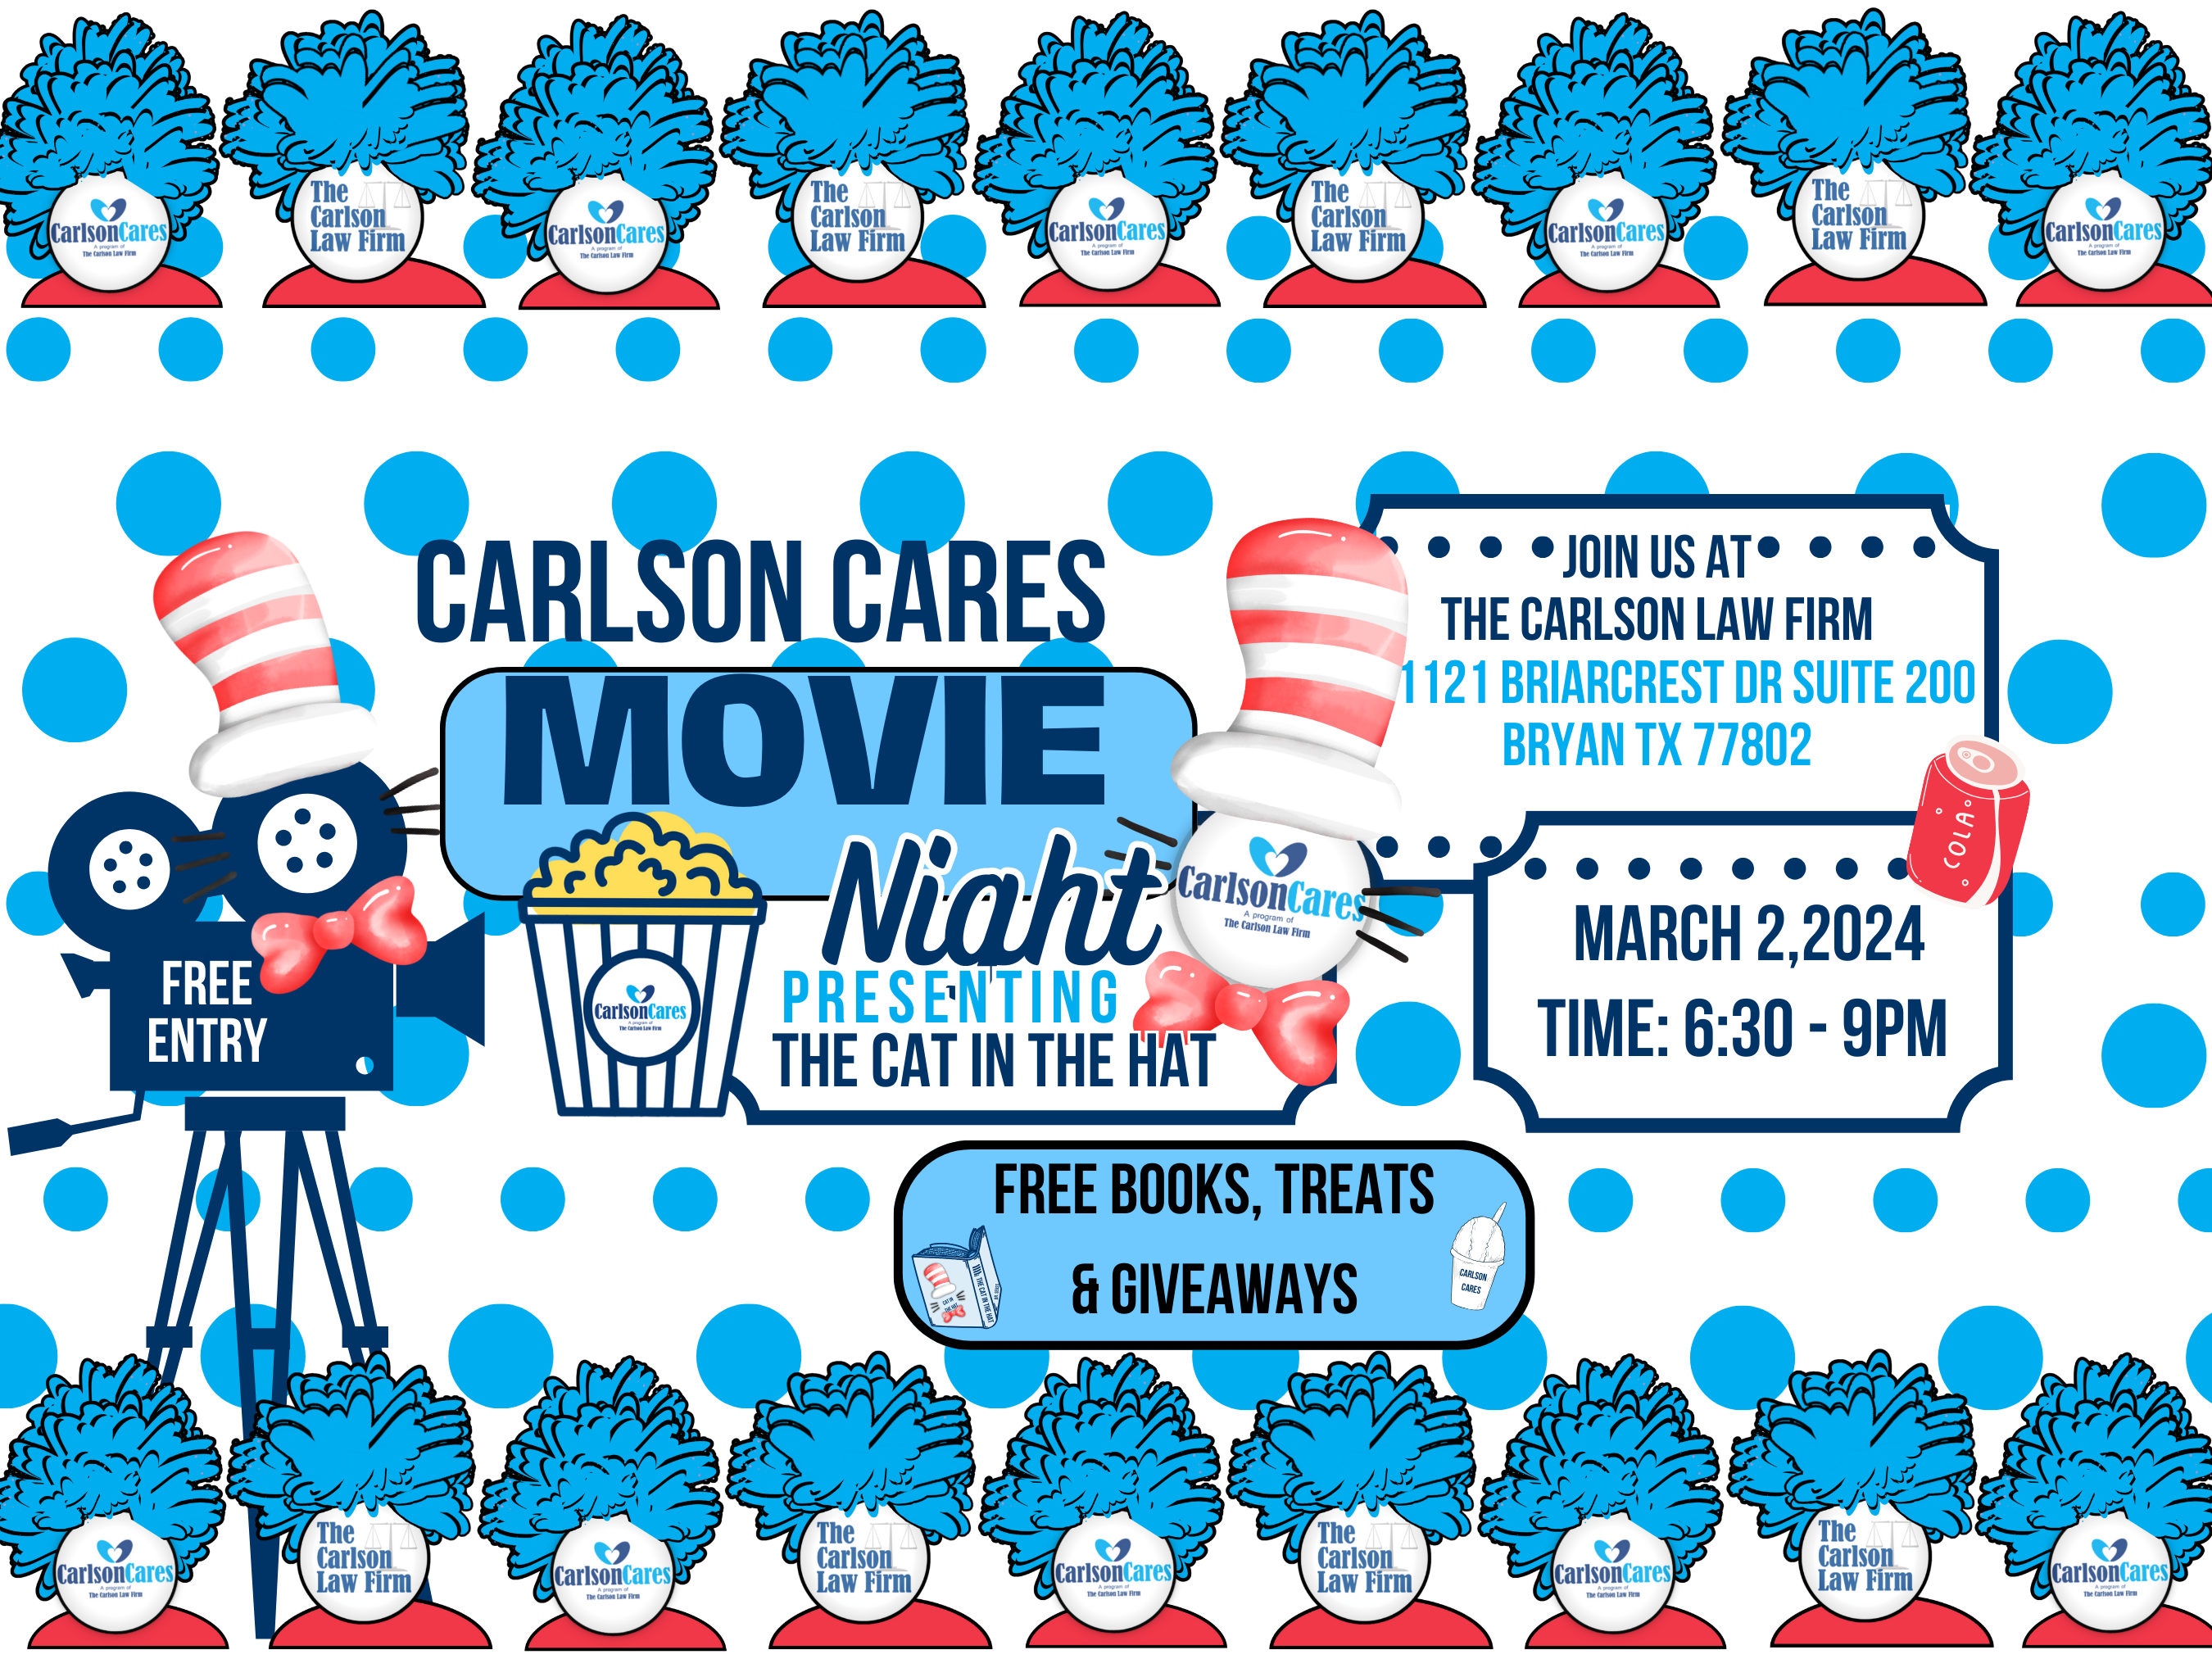 Celebrate Read Across America with Carlson Cares Movie Night at The Carlson Law Firm in Bryan.